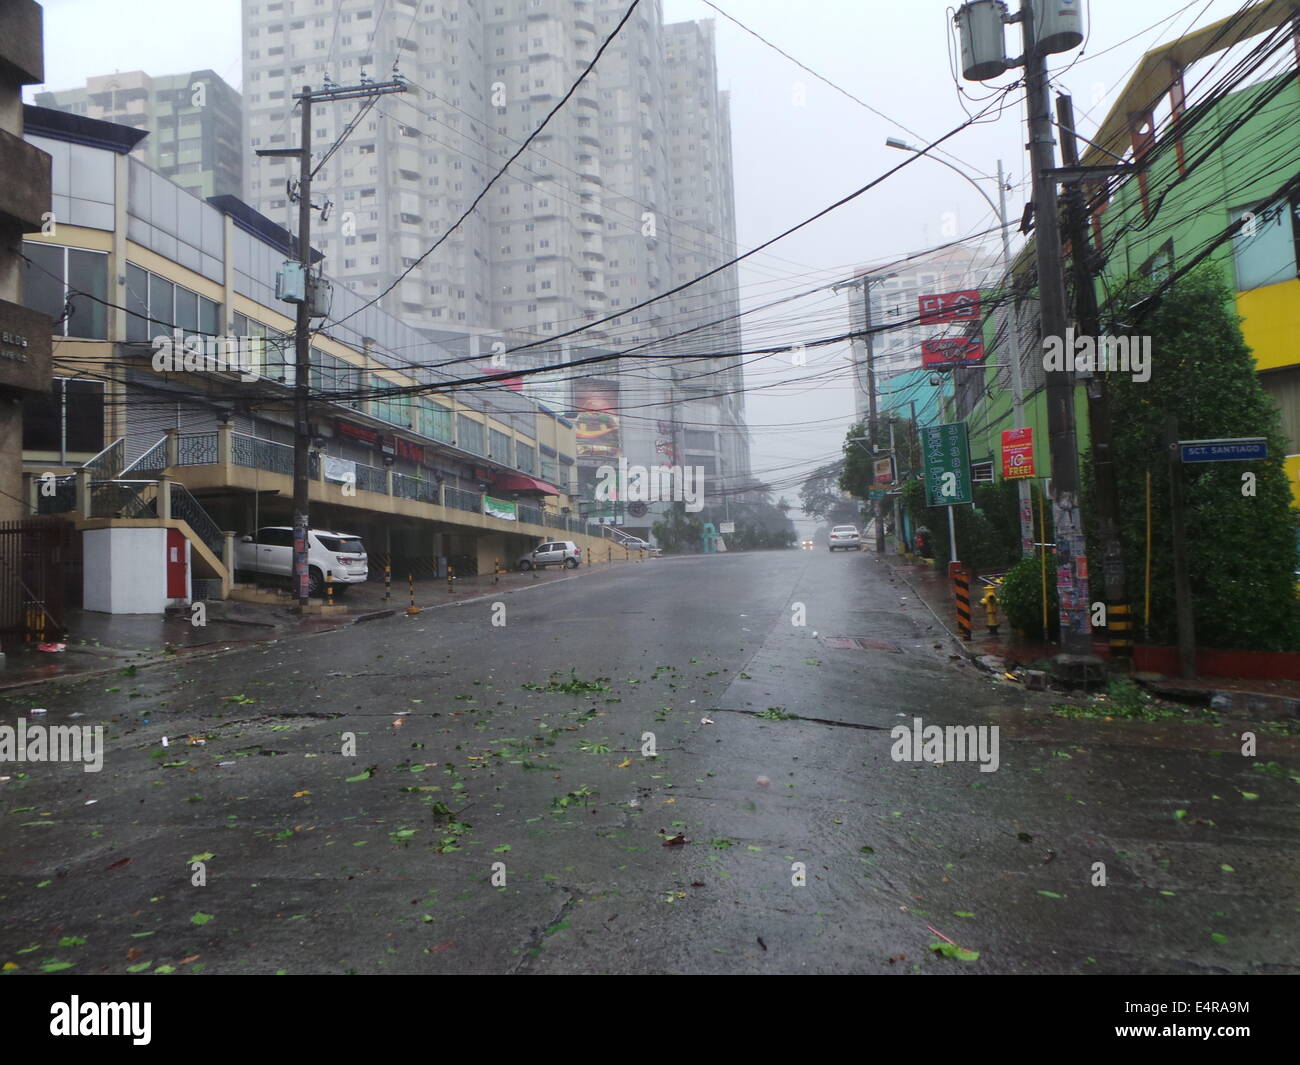 Manila, Philippines. 16th July, 2014. The Typhoon Glenda (Int'l name: Rammasun), the strongest storm to hit the country this year, killed at least 10 people, prompting the evacuation of more than 380,000 people and paralyzing financial markets, offices and schools. © Sherbien Dacalanio/Pacific Press/Alamy Live News Stock Photo